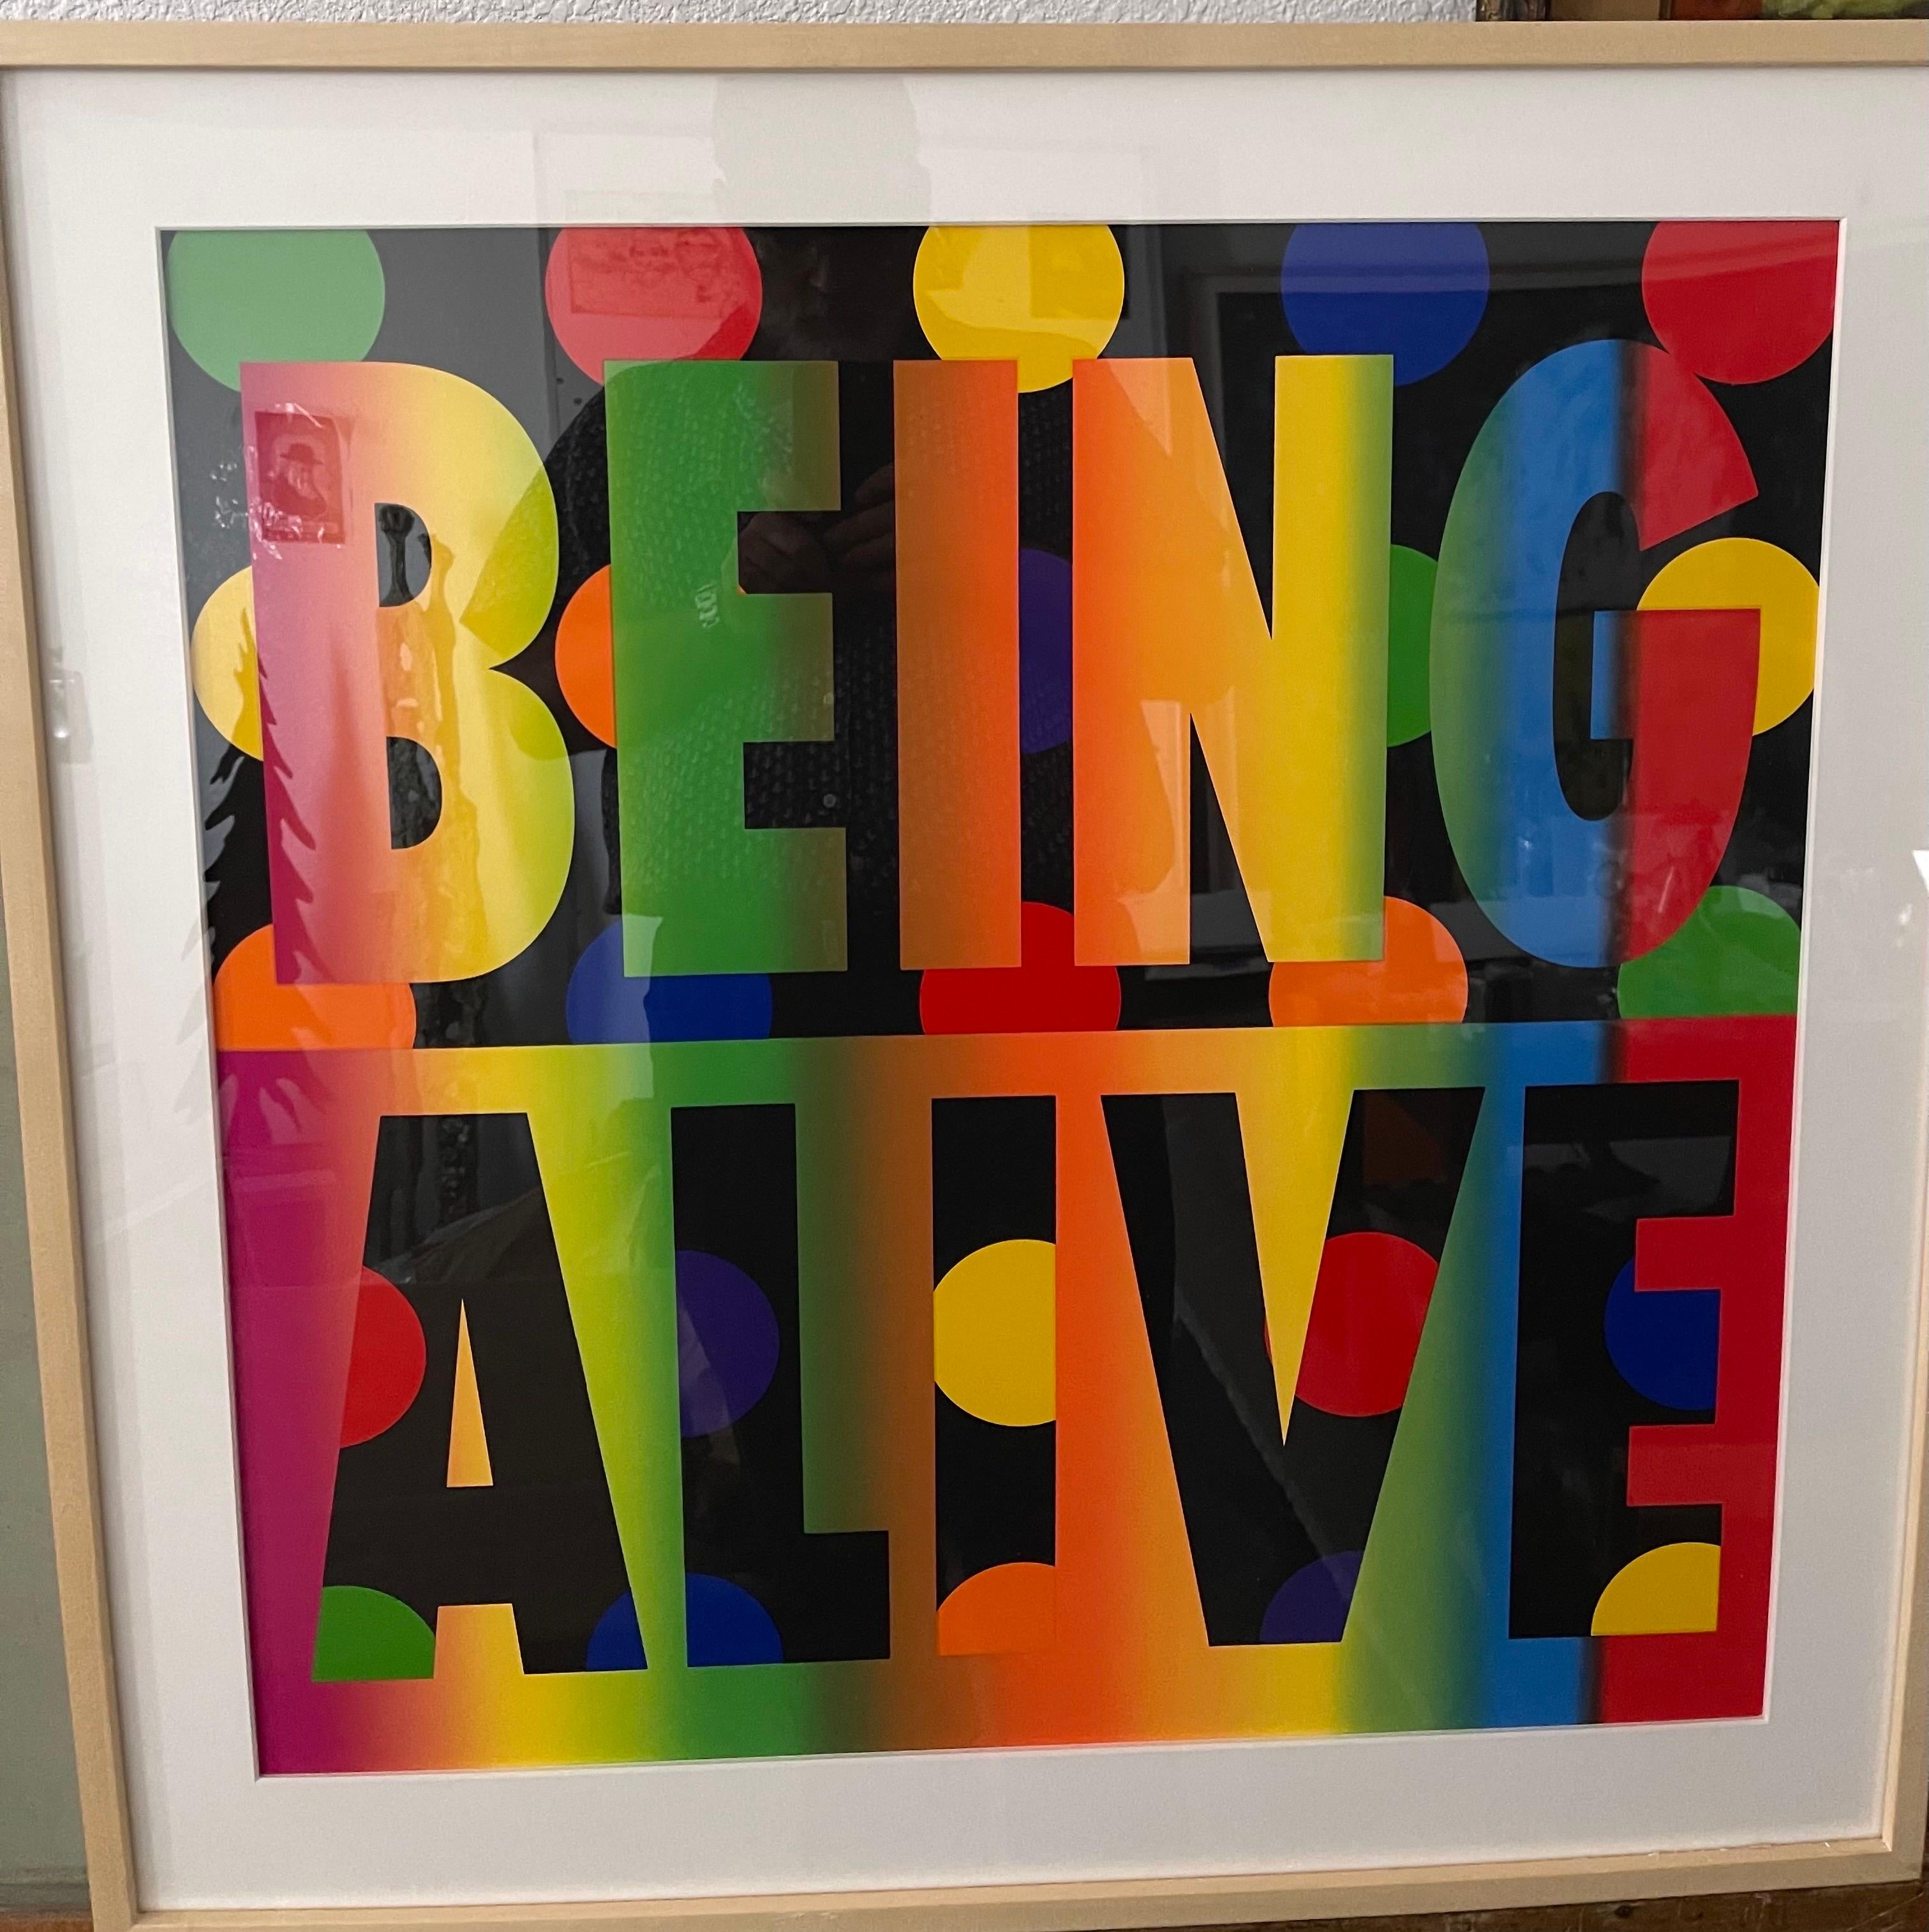 Deborah Kass (born 1952)
Being Alive, 2012
nine-color silkscreen, one color blend on 2-ply museum board
Image 24 x 24 image. Frame 29 x 29 x 2 inches
Edition 1/65
Hand signed and dated in pencil, lower right verso; numbered lower left verso

Being